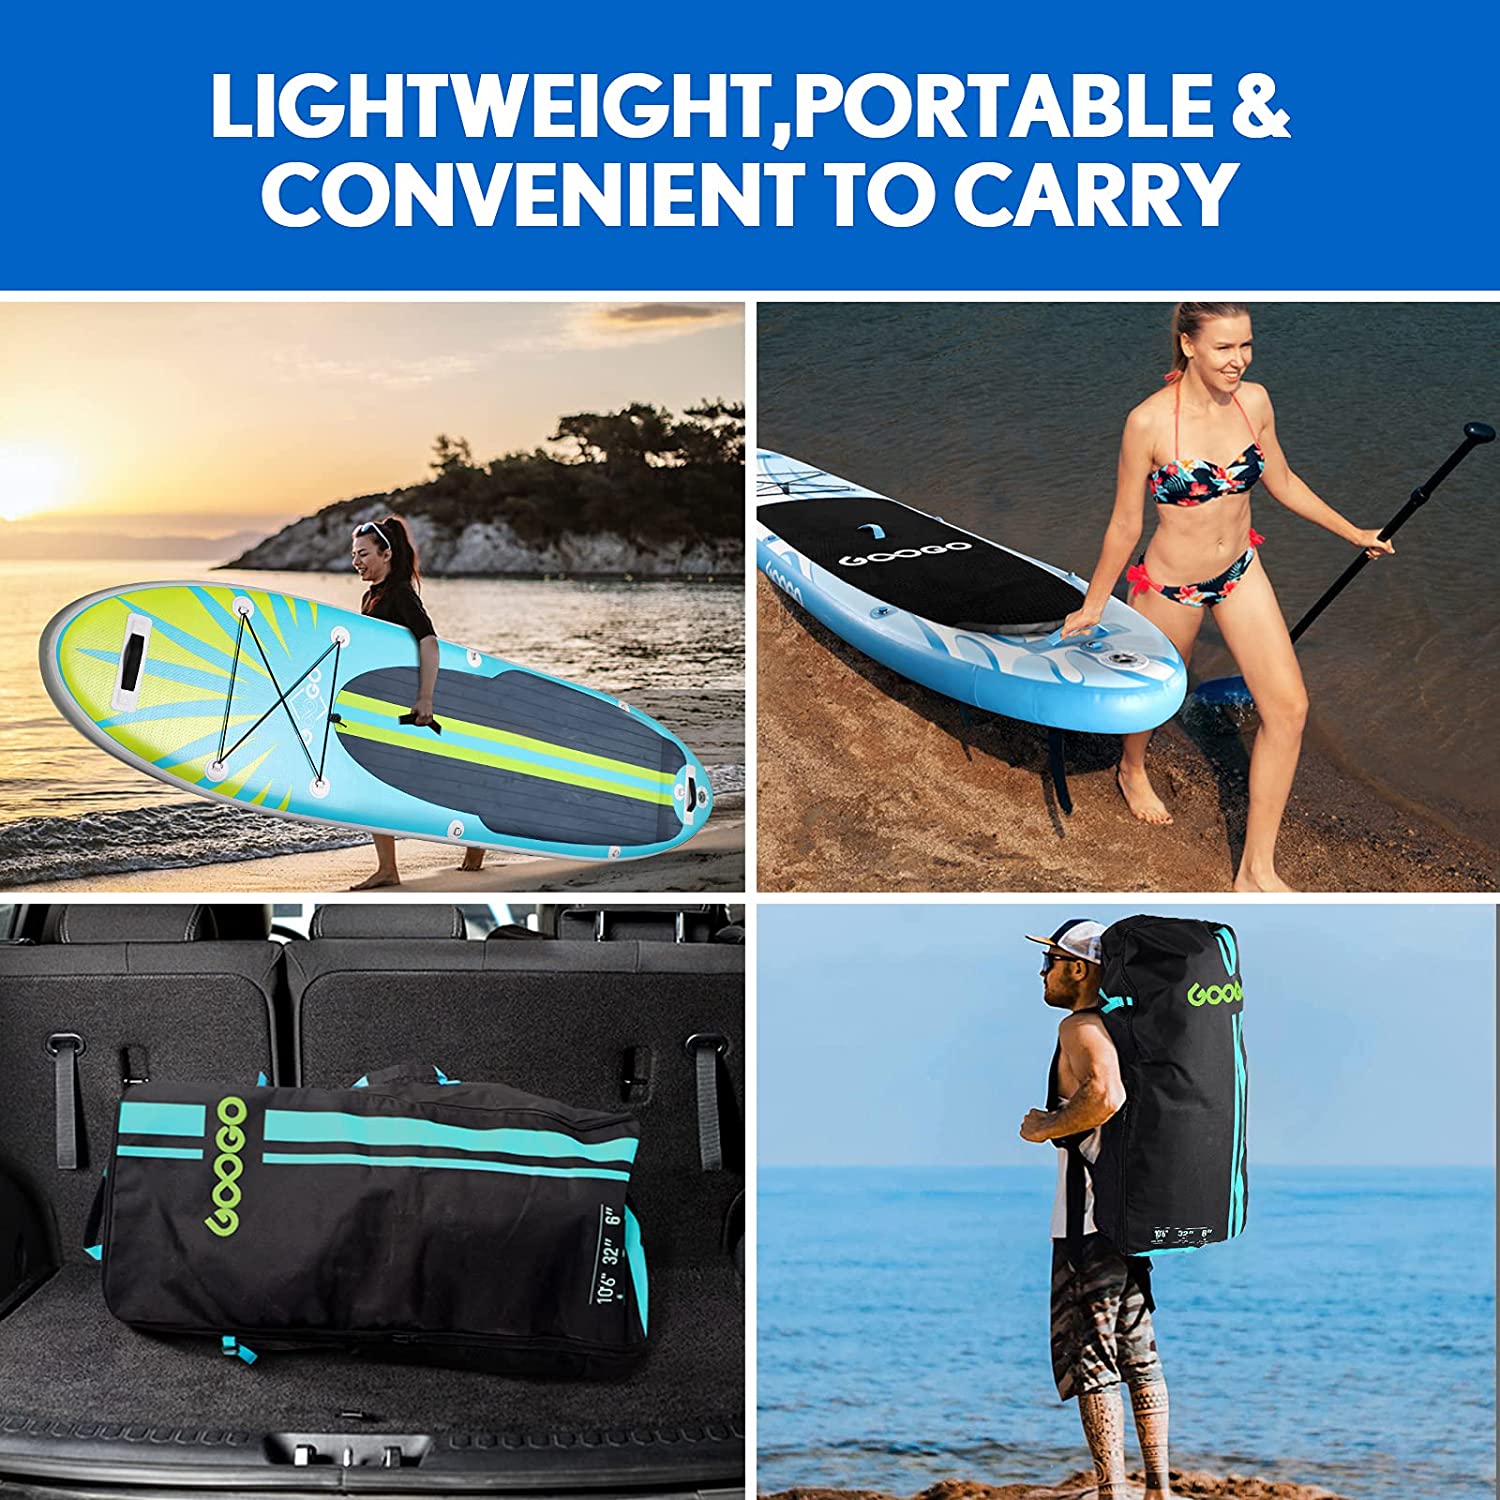 GOOGO 10'6"x32"x6" 330lbs Capacity All-Around Inflatable Sup Stand Up Paddle Boards for All Skill Levels - Stable,Durable and Lightweight SUP with Paddle Board Accessories & Carry Bag